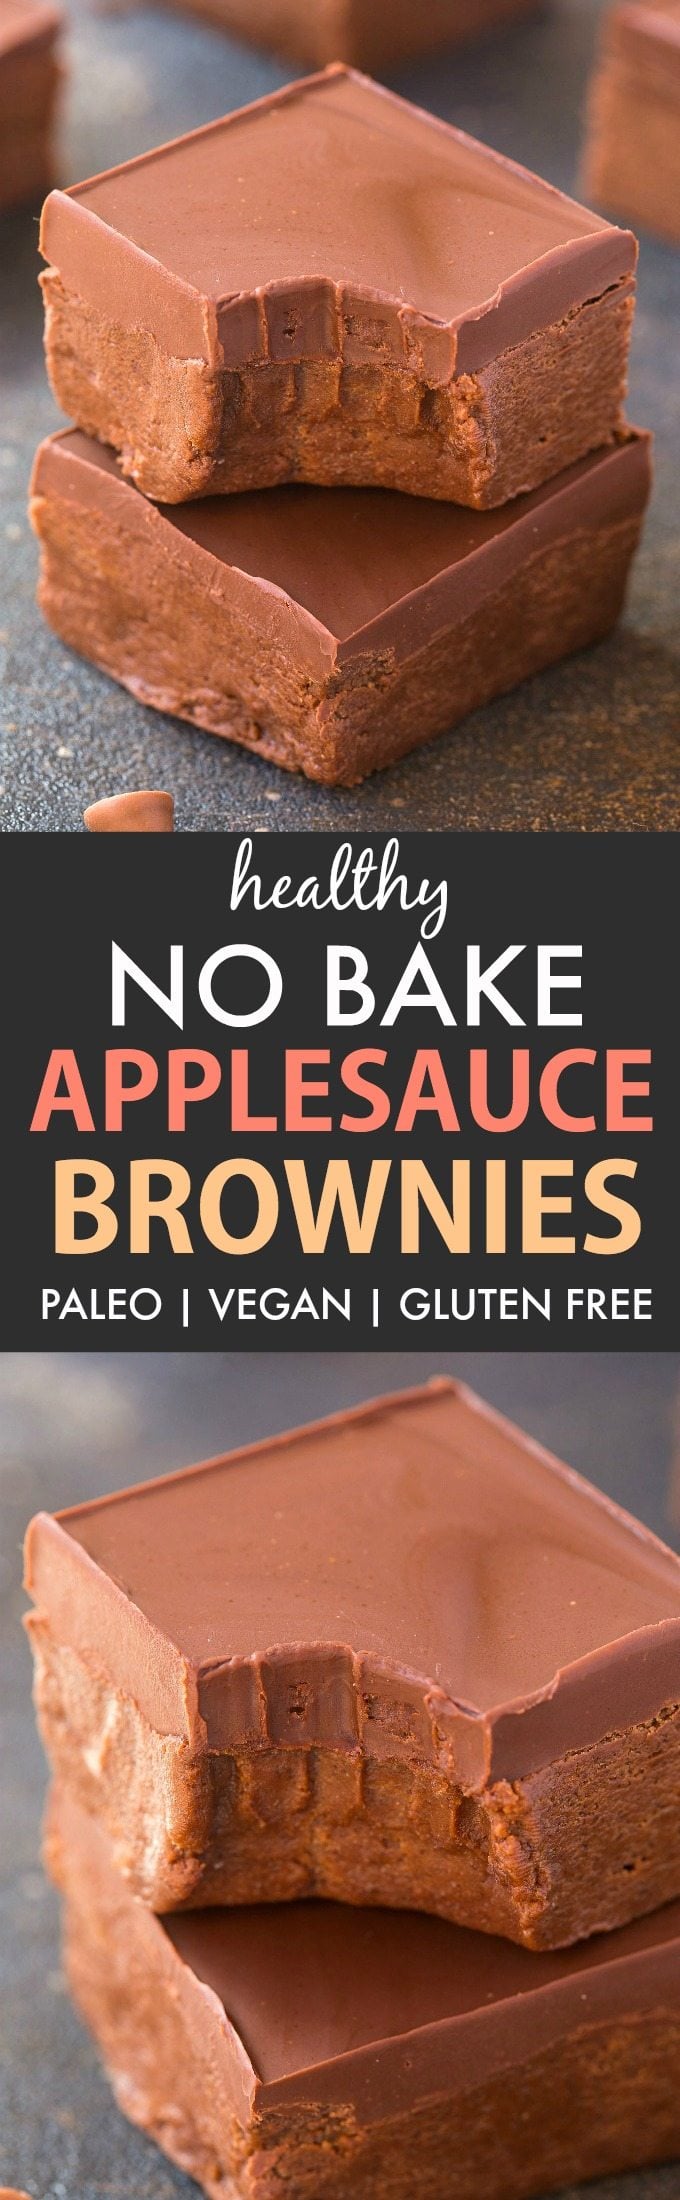 Healthy No Bake Applesauce Brownies (Paleo, Vegan, Gluten Free)- Thick and fudgy raw brownies which are super fudgy and loaded with chocolate! A guilt-free snack or healthy low carb dessert! {V, GF, P, SF recipe}- thebigmansworld.com #applesauce #rawbrownies